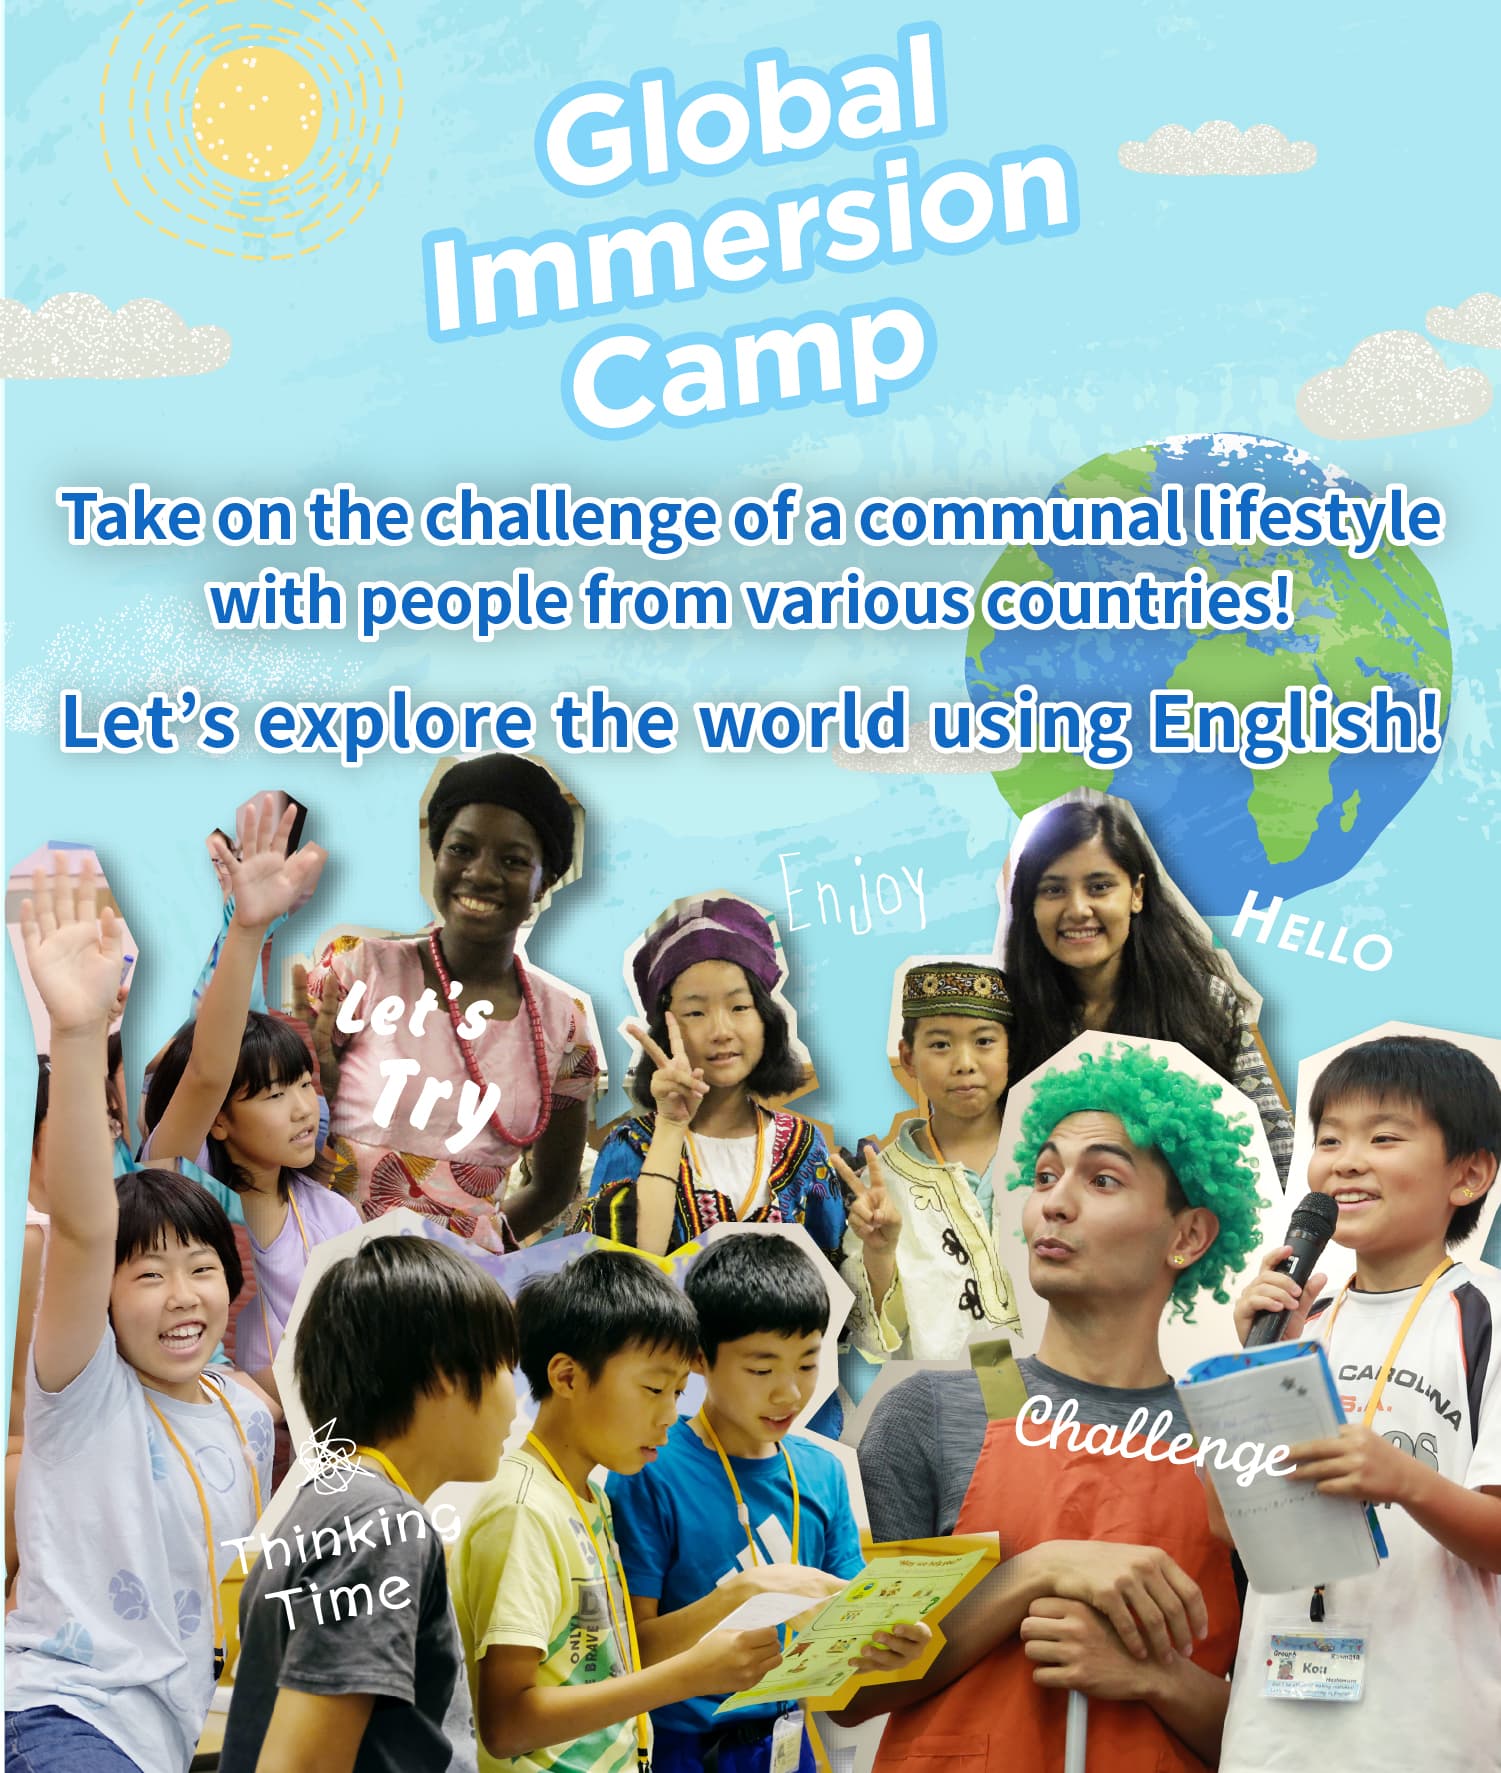 Take on the challenge of a communal lifestyle with people from various countries! Let’s explore the world using English!